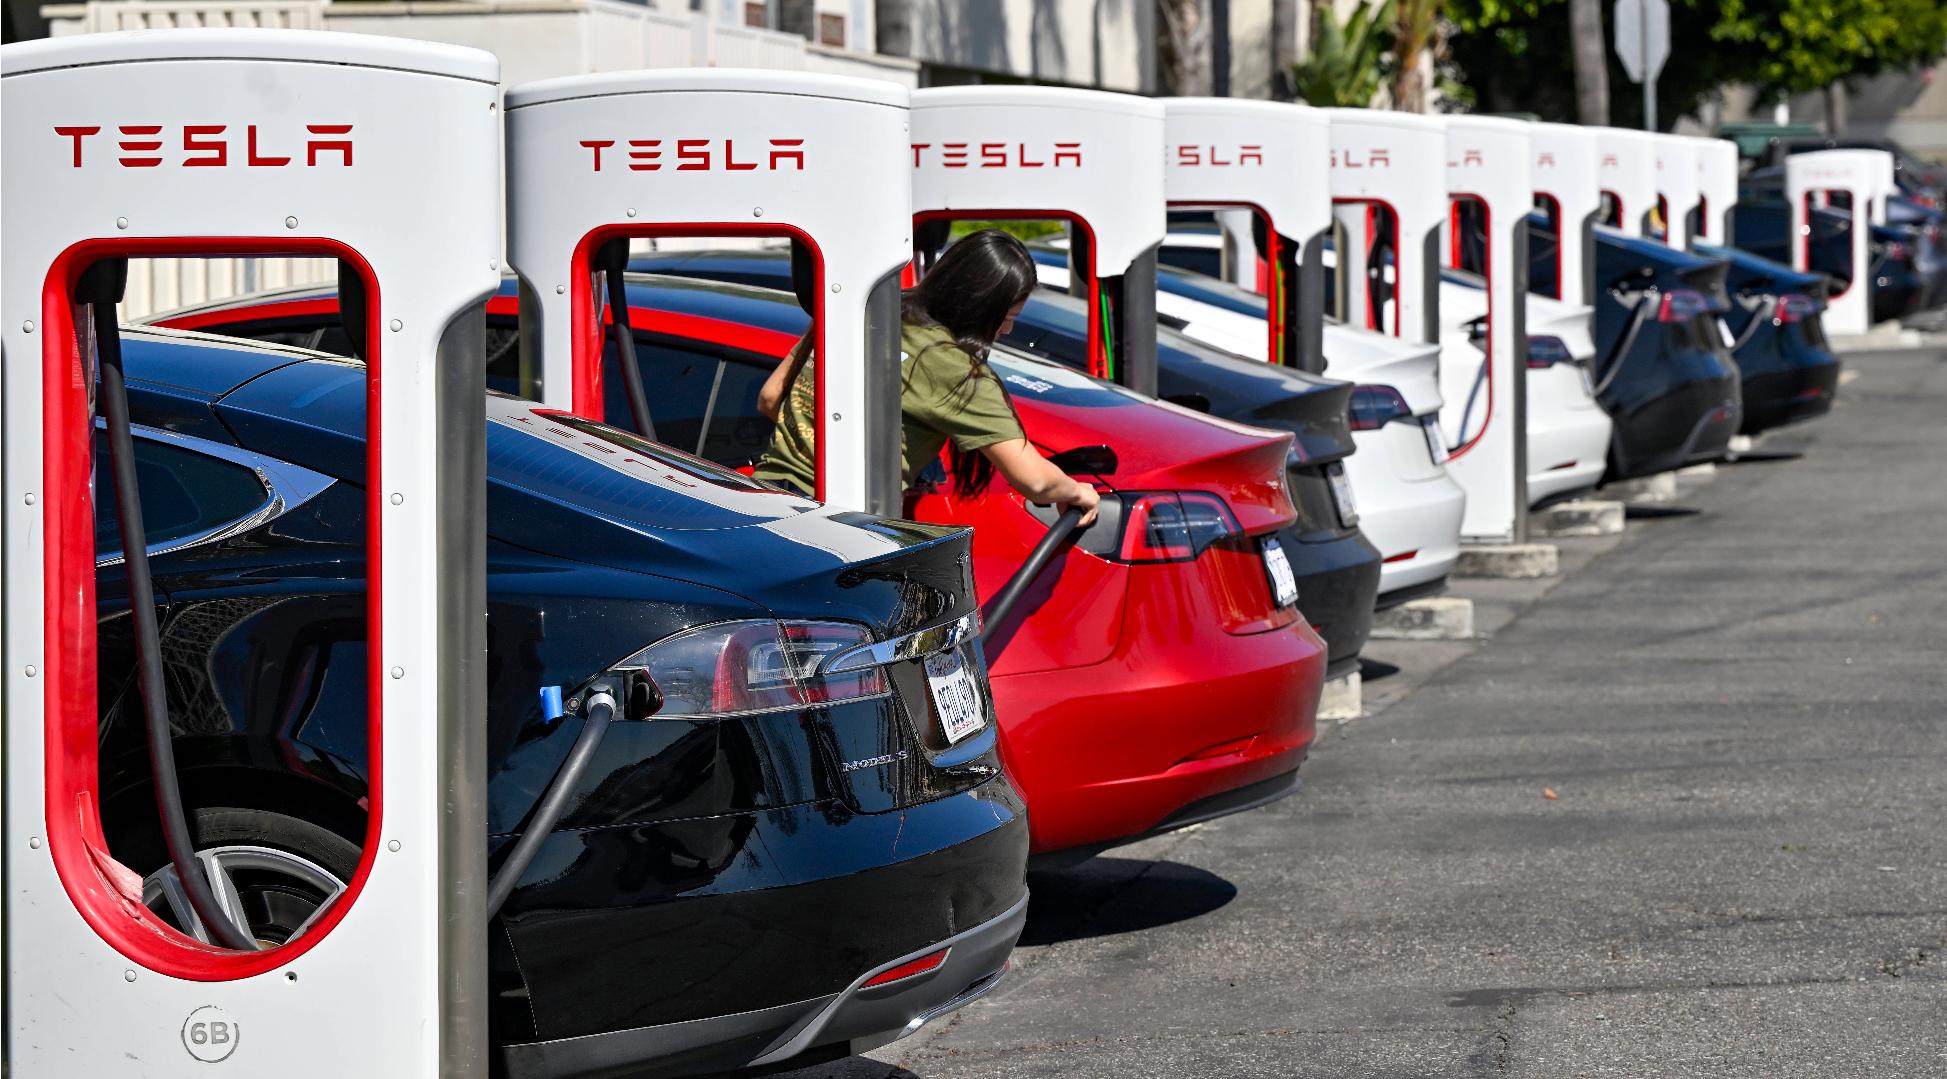 Tesla Implements 10% Workforce Reduction Due to Slowing Sales